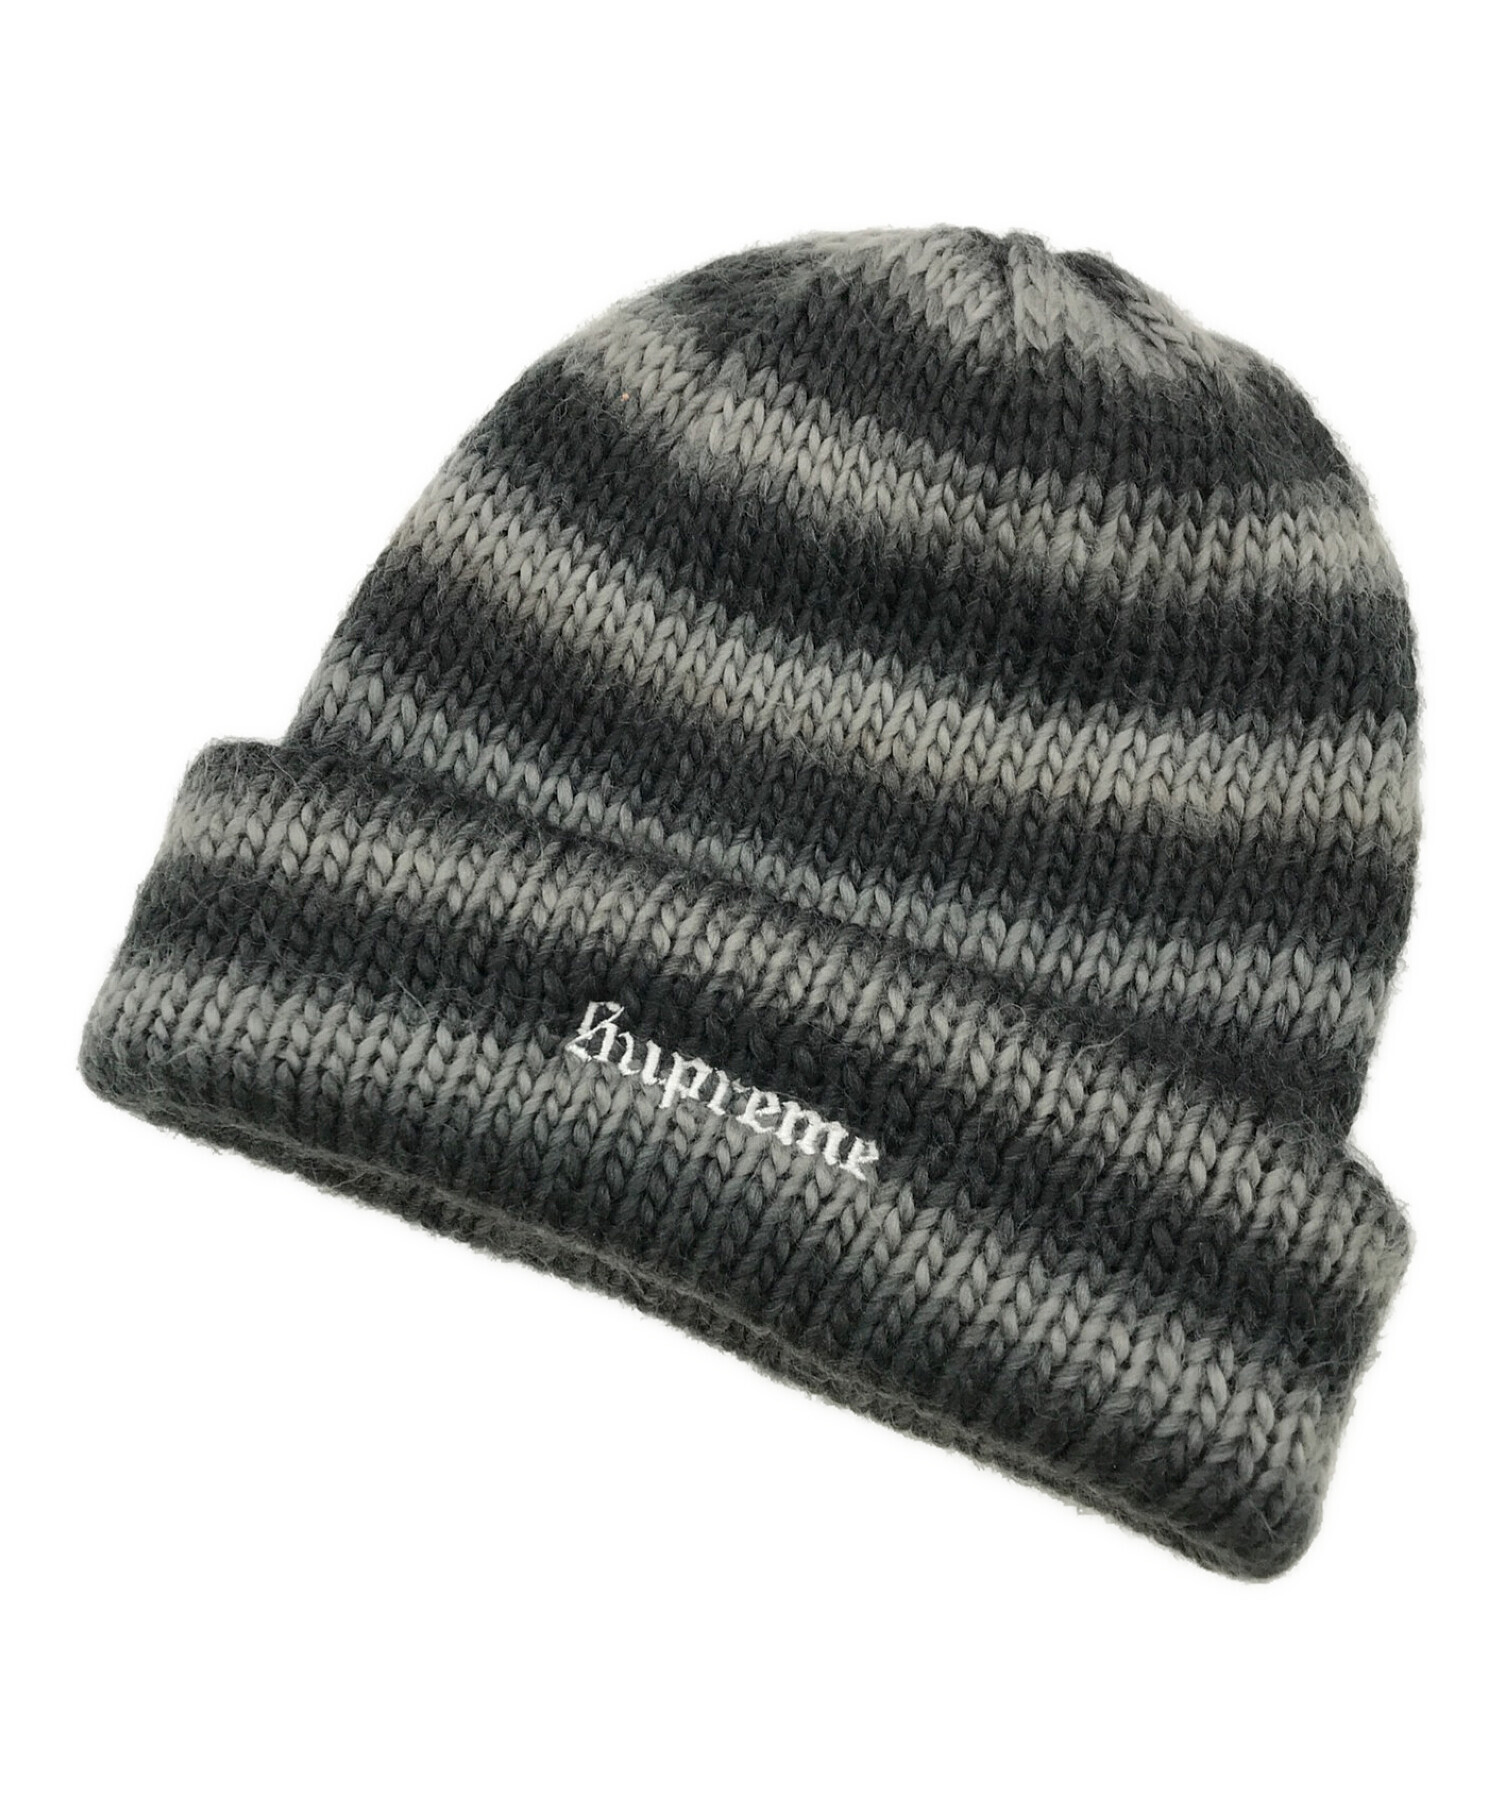 Supreme Ombre Stripe Beanie レア商品 最終値下げ